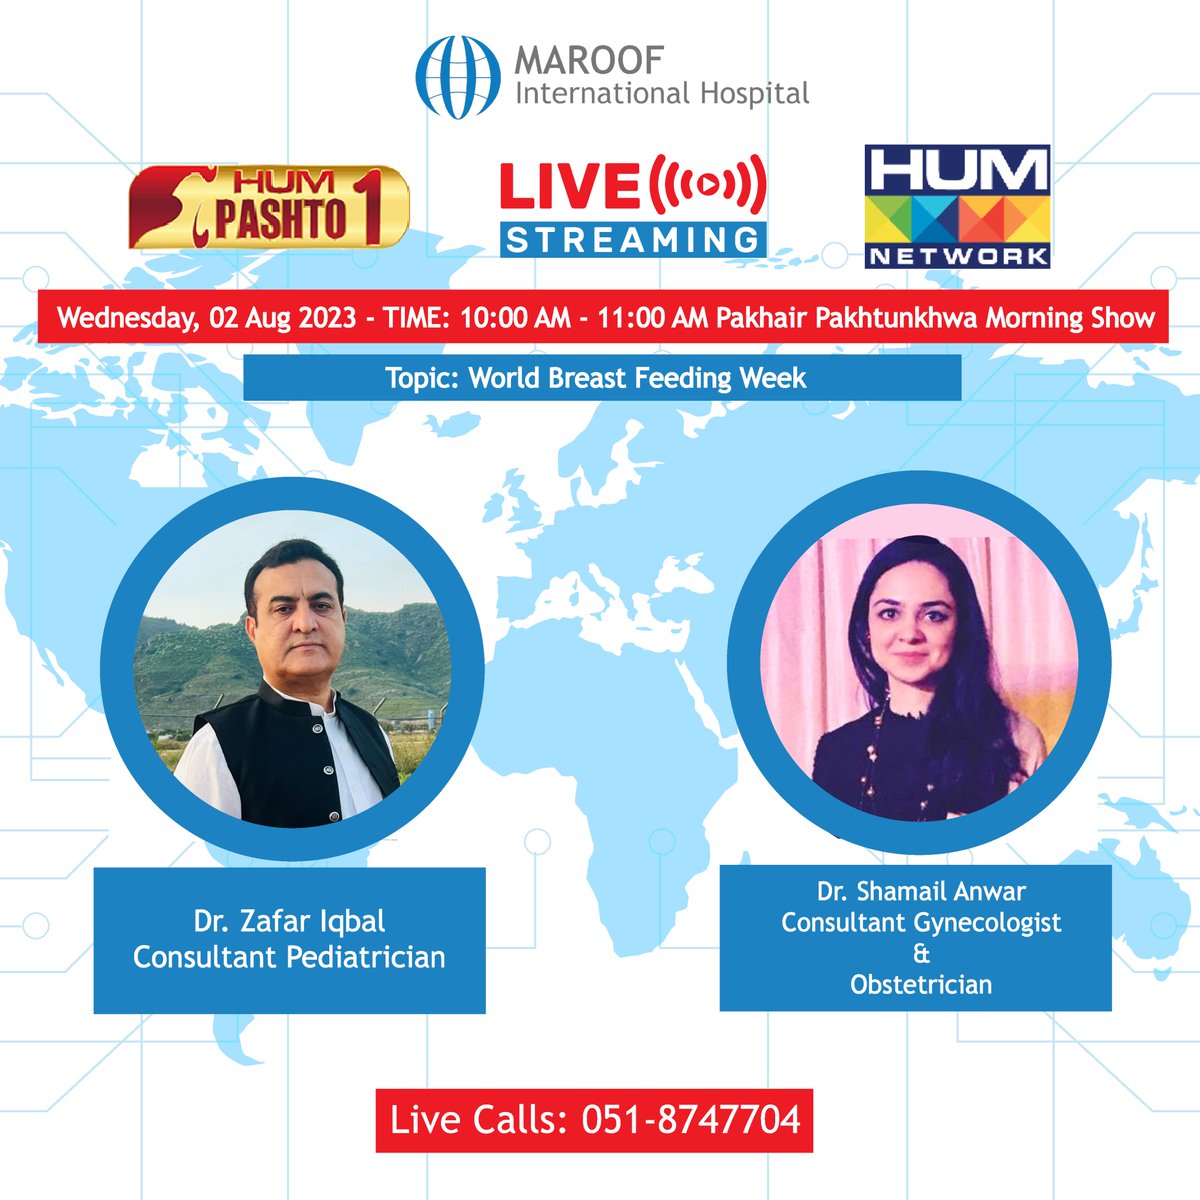 Our team of Experts will be live on HUM PASHTO 1's morning show, 'Pakhair Pakhtunkhwa' on the occasion of 'World Breast Feeding Week 2023'.

They will be taking live calls at 051-8747704.
.
.
.
.
.
.
#maroofinternationalhospital #mih #humtvpakistanofficial #pakhairpakhtunkhwa